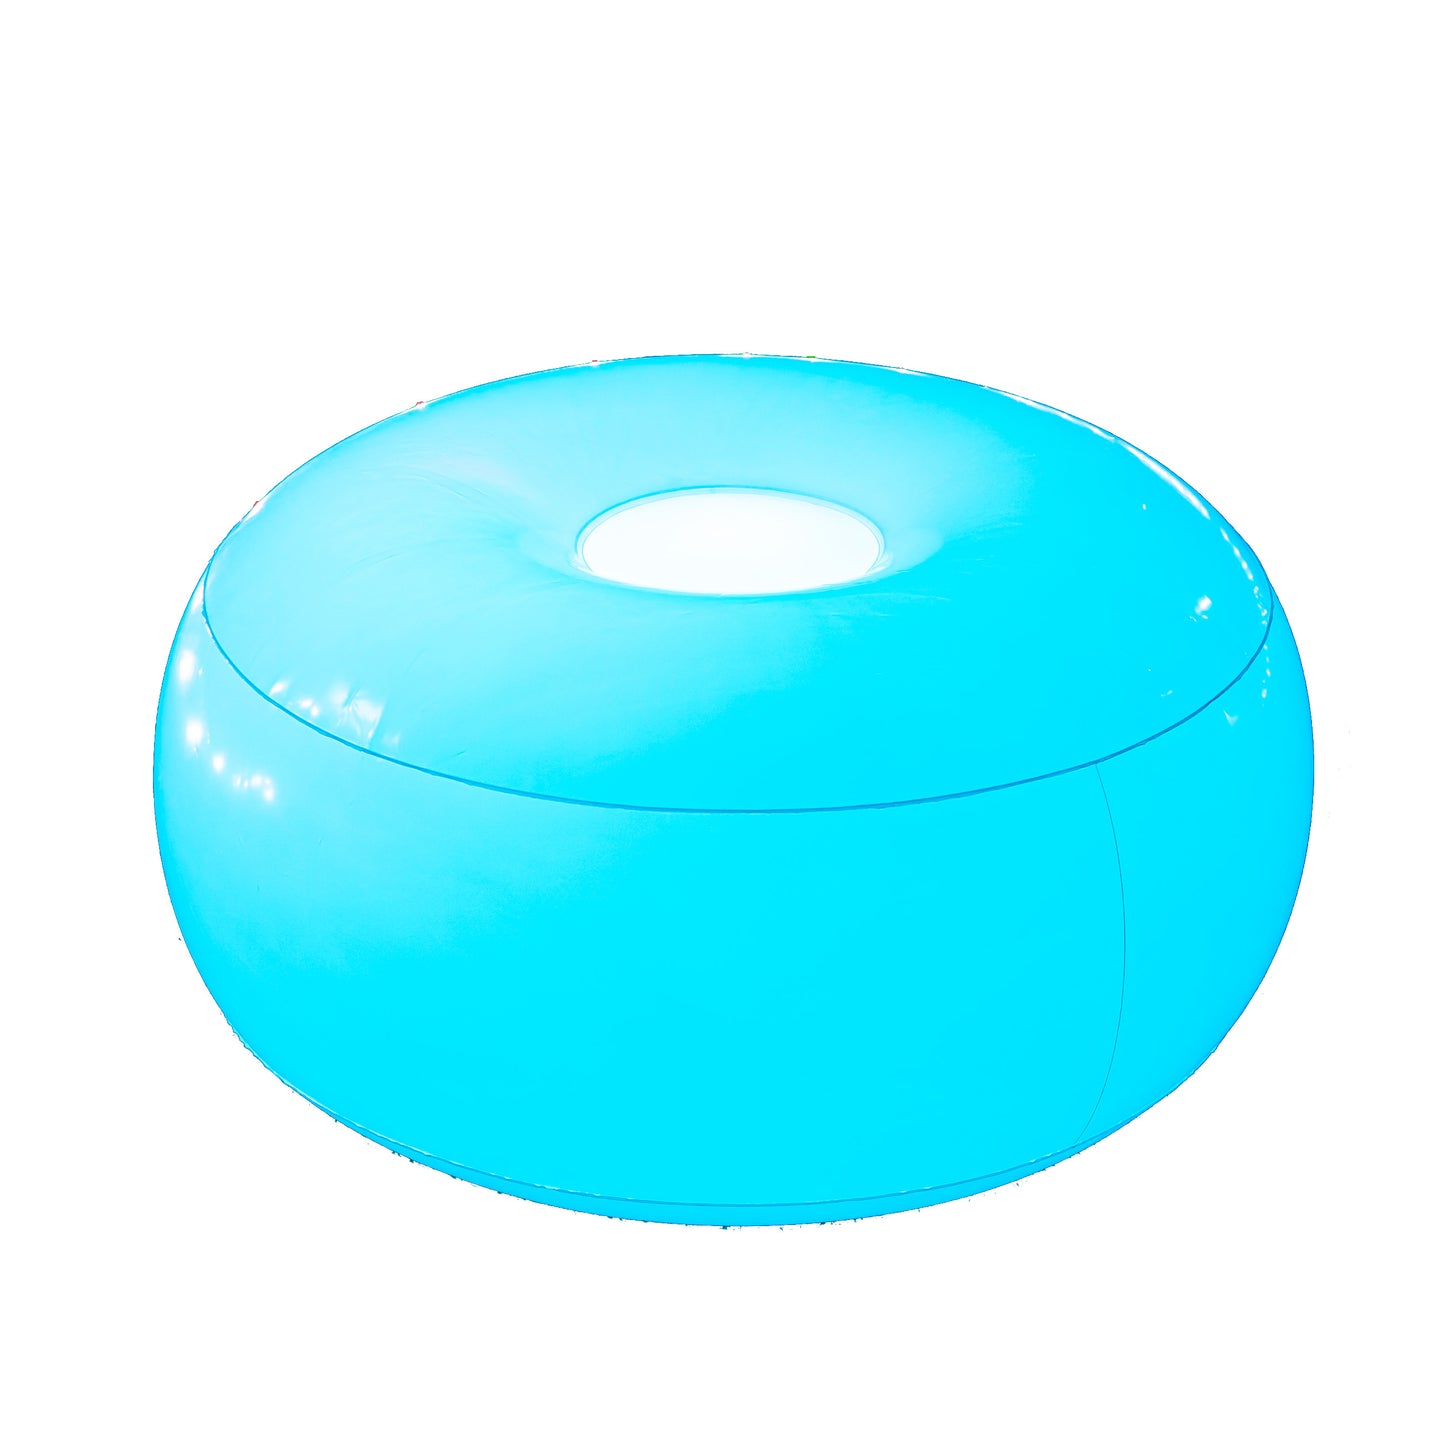 Air Candy Illuminated Color Changing LED Ottoman